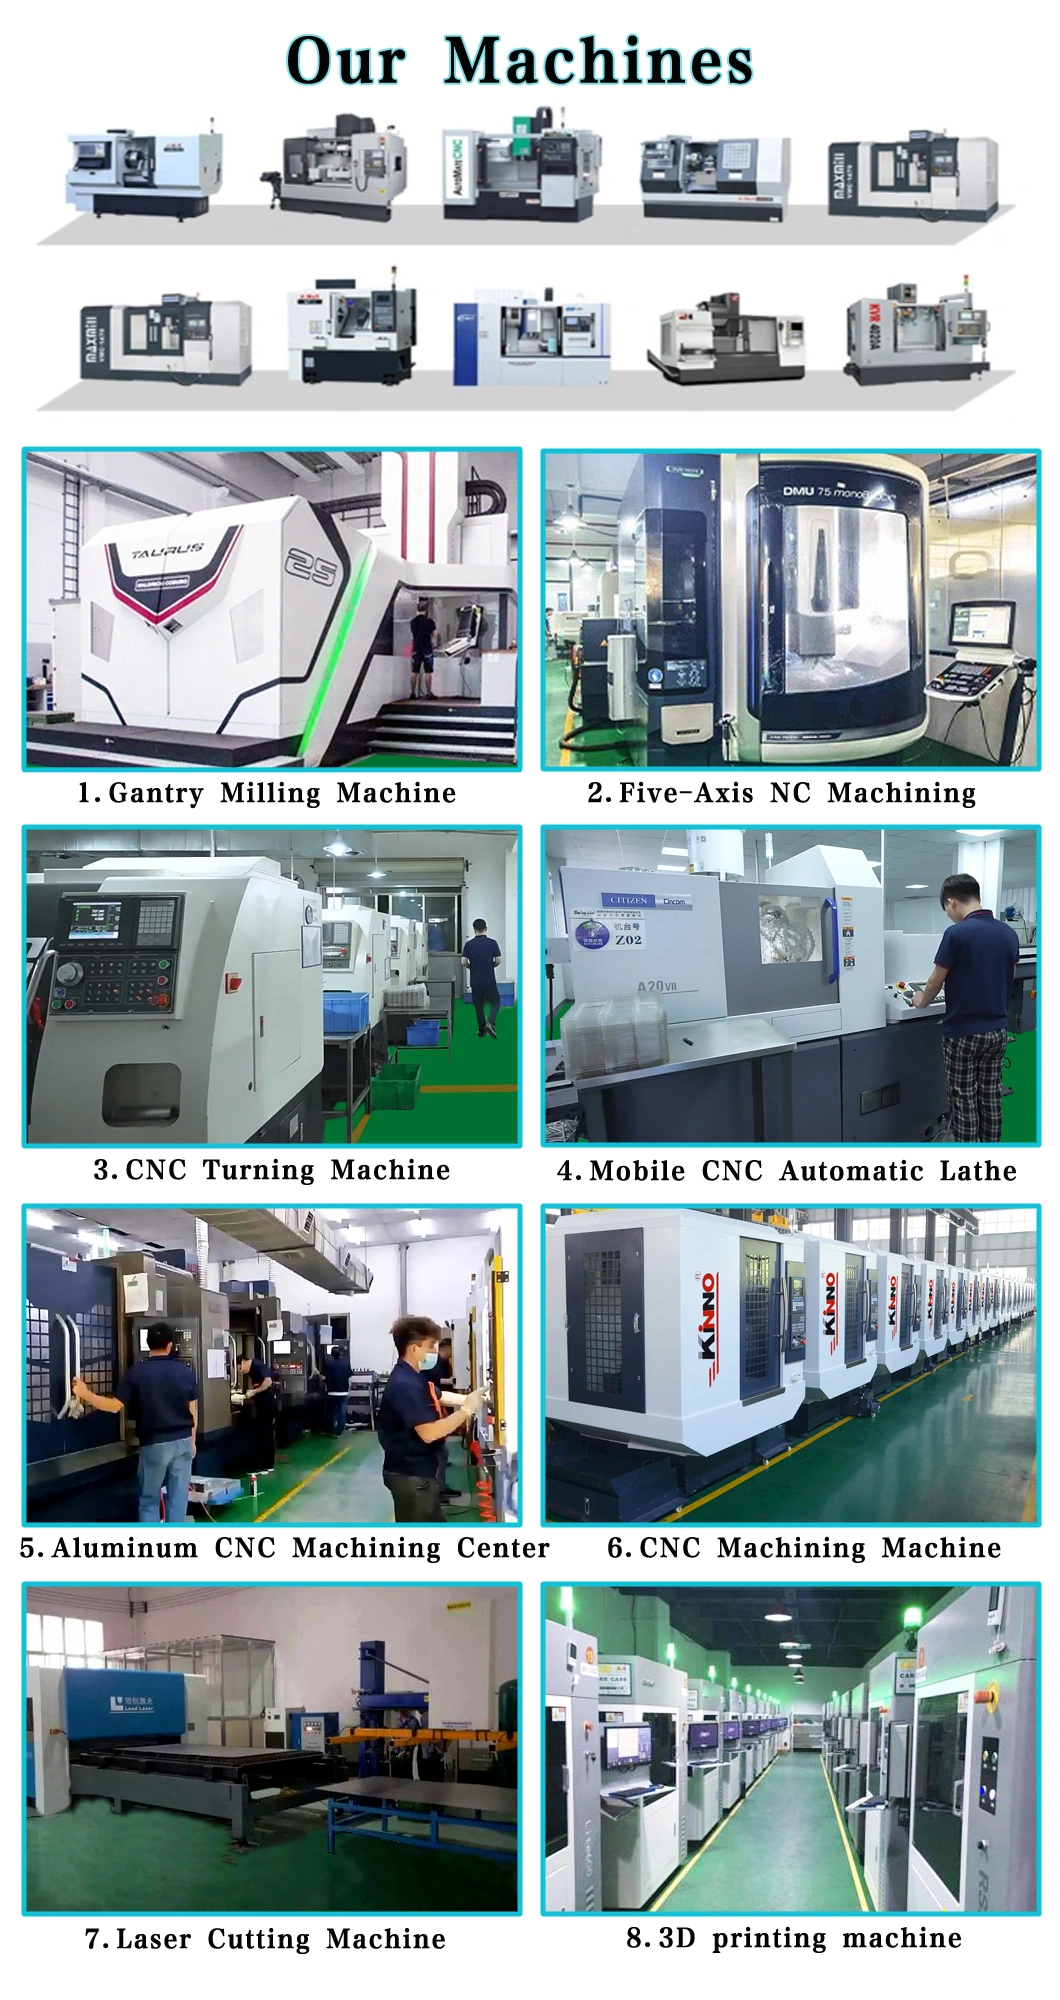 Vacuum Forming Processing of Structural Parts of Plastic and Metal Materials Part